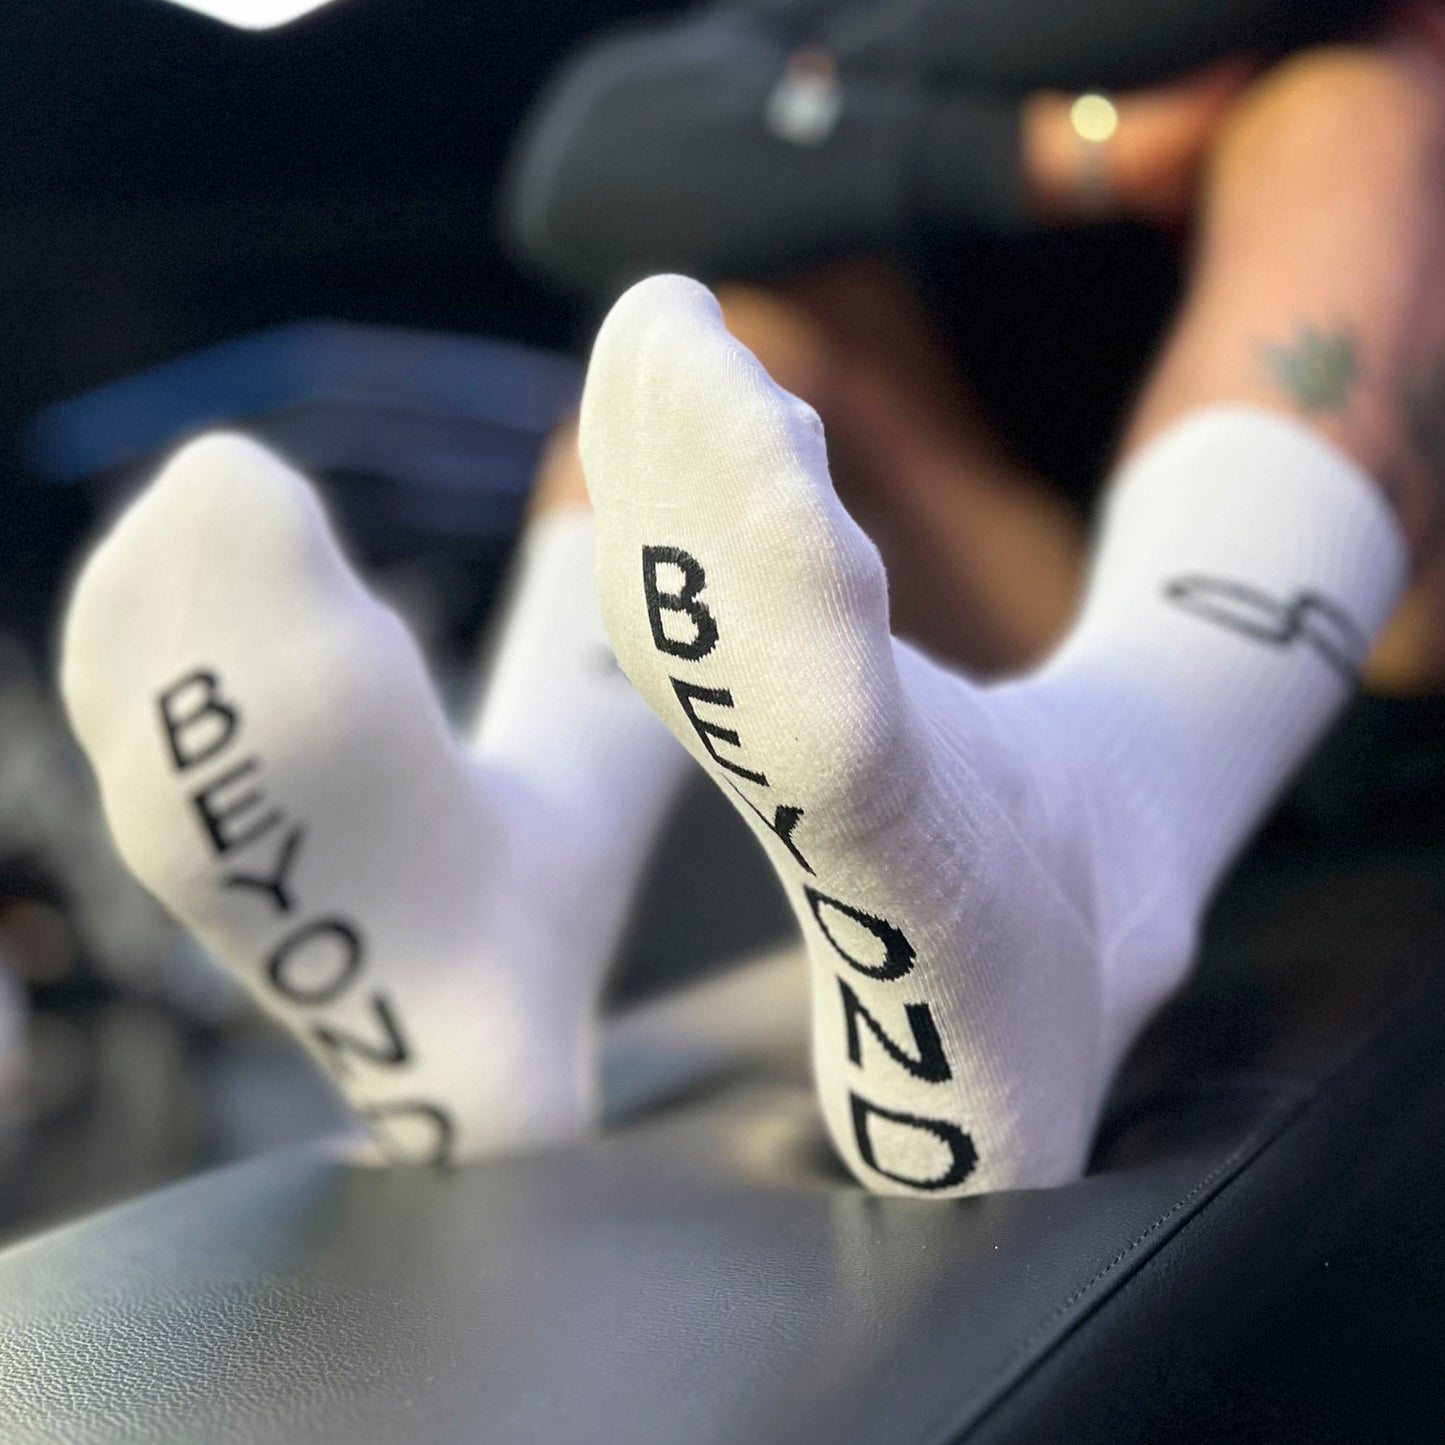 Beyond Your Physical Athletic sport socks white